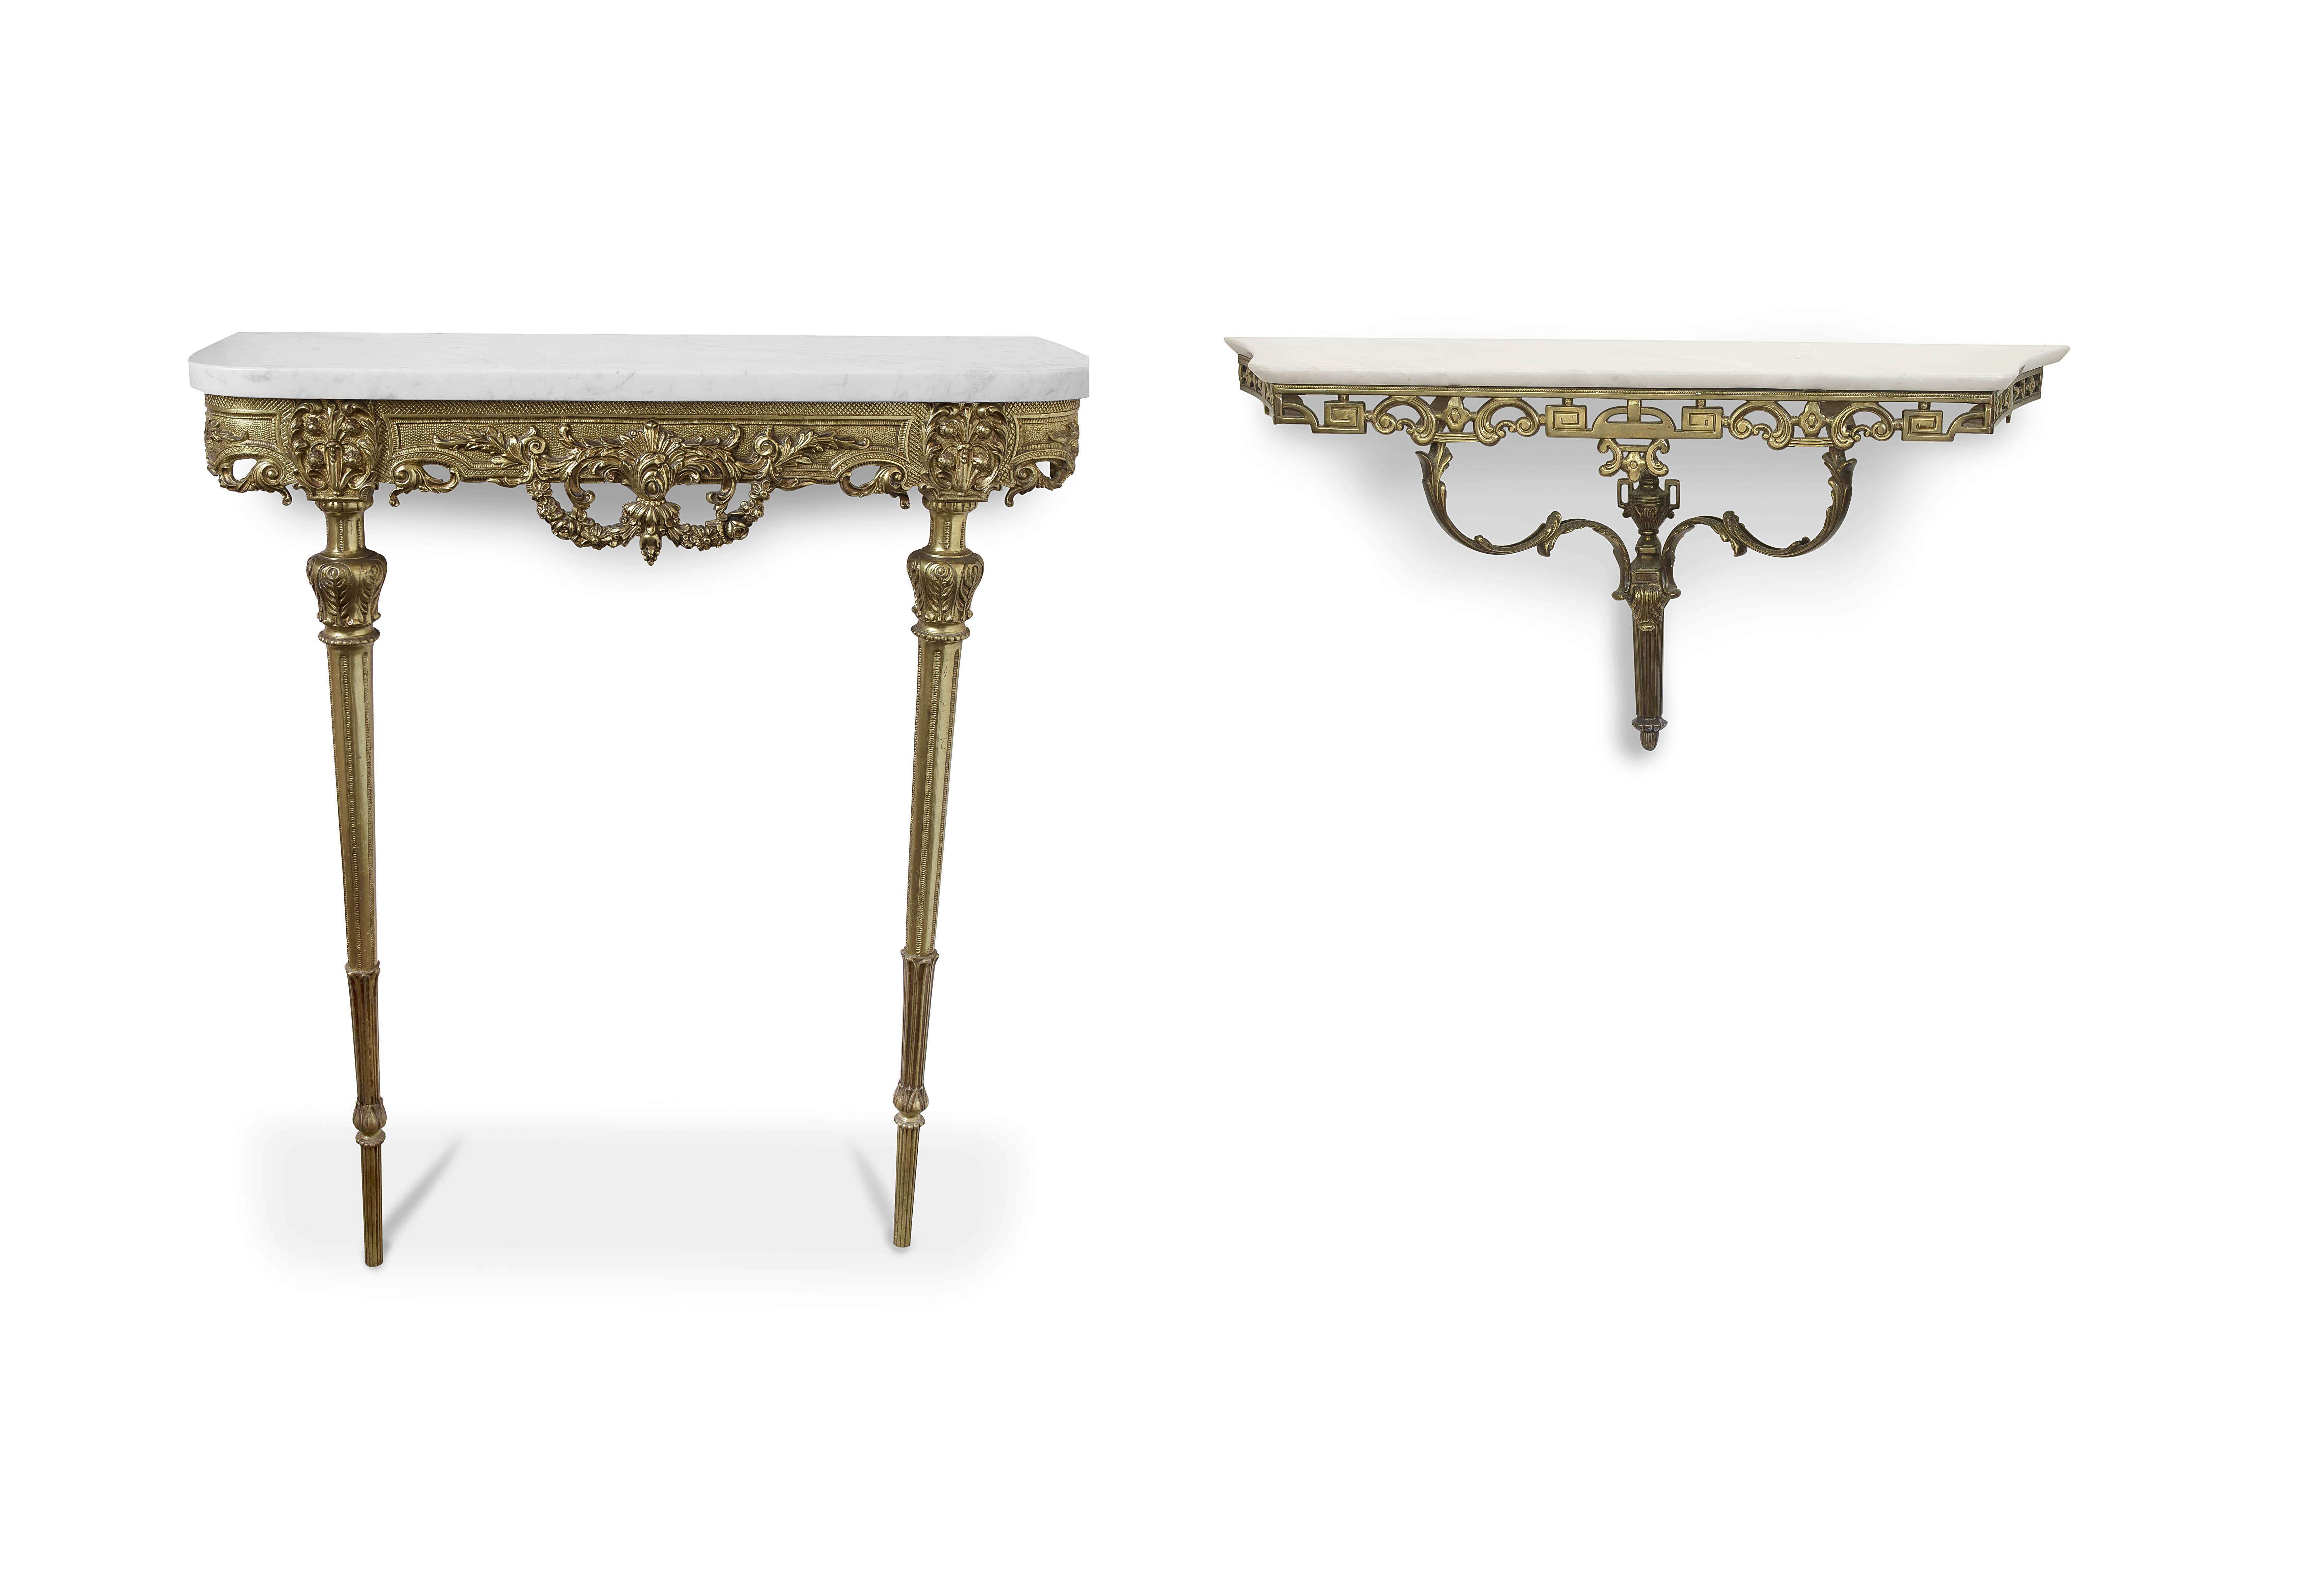 A French style marble-topped and gilt-metal wall-mounted console table, 20th century